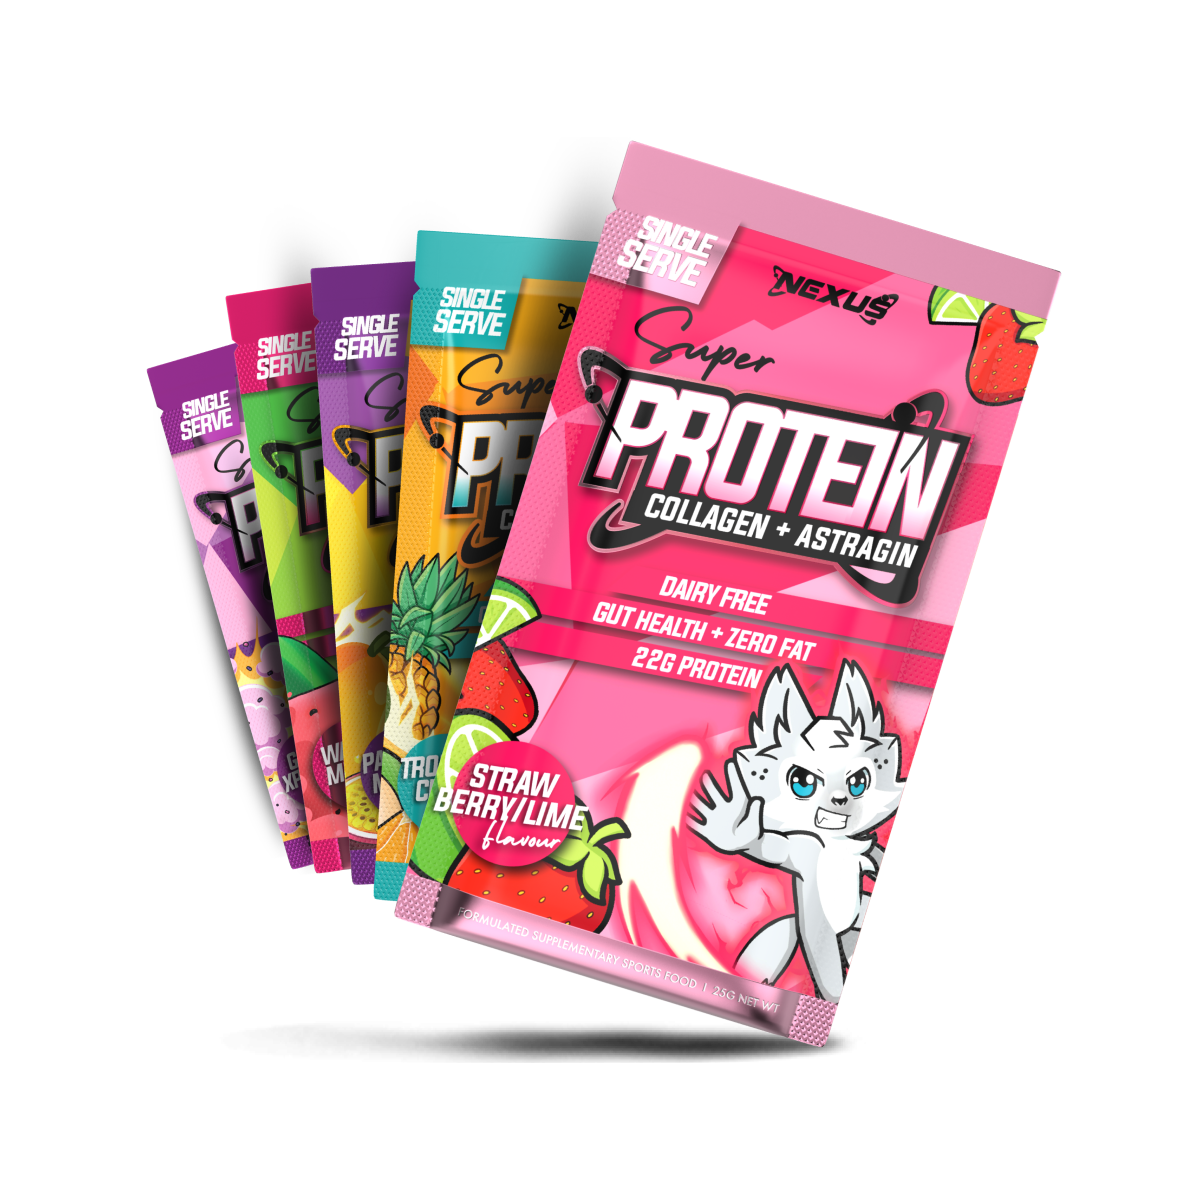 Protein Water Single Serve 5 Pack [Gift]